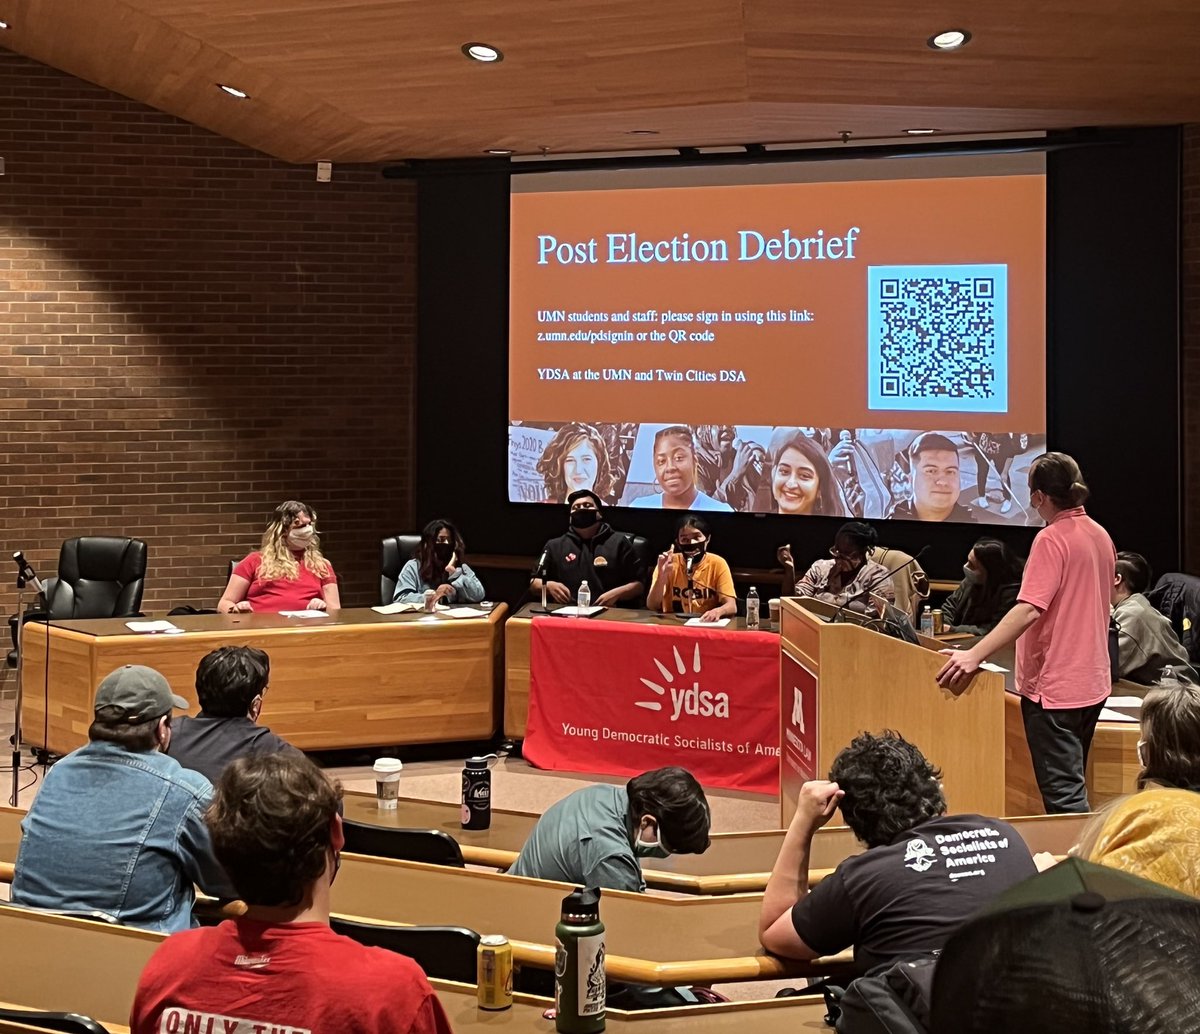 Such an empowering panel ❤️

had an incredible discussion at tonight’s @TwinCitiesDSA Post-Election Debrief, hosted by @ydsaumn; with friends from teams Sheila, Jason, Robin & Aisha!

@LunaZeidner @AurinMpls @ChavezForWard9 @Robin4mpls @celesteisaqueen @aishaforward10 @trans_them